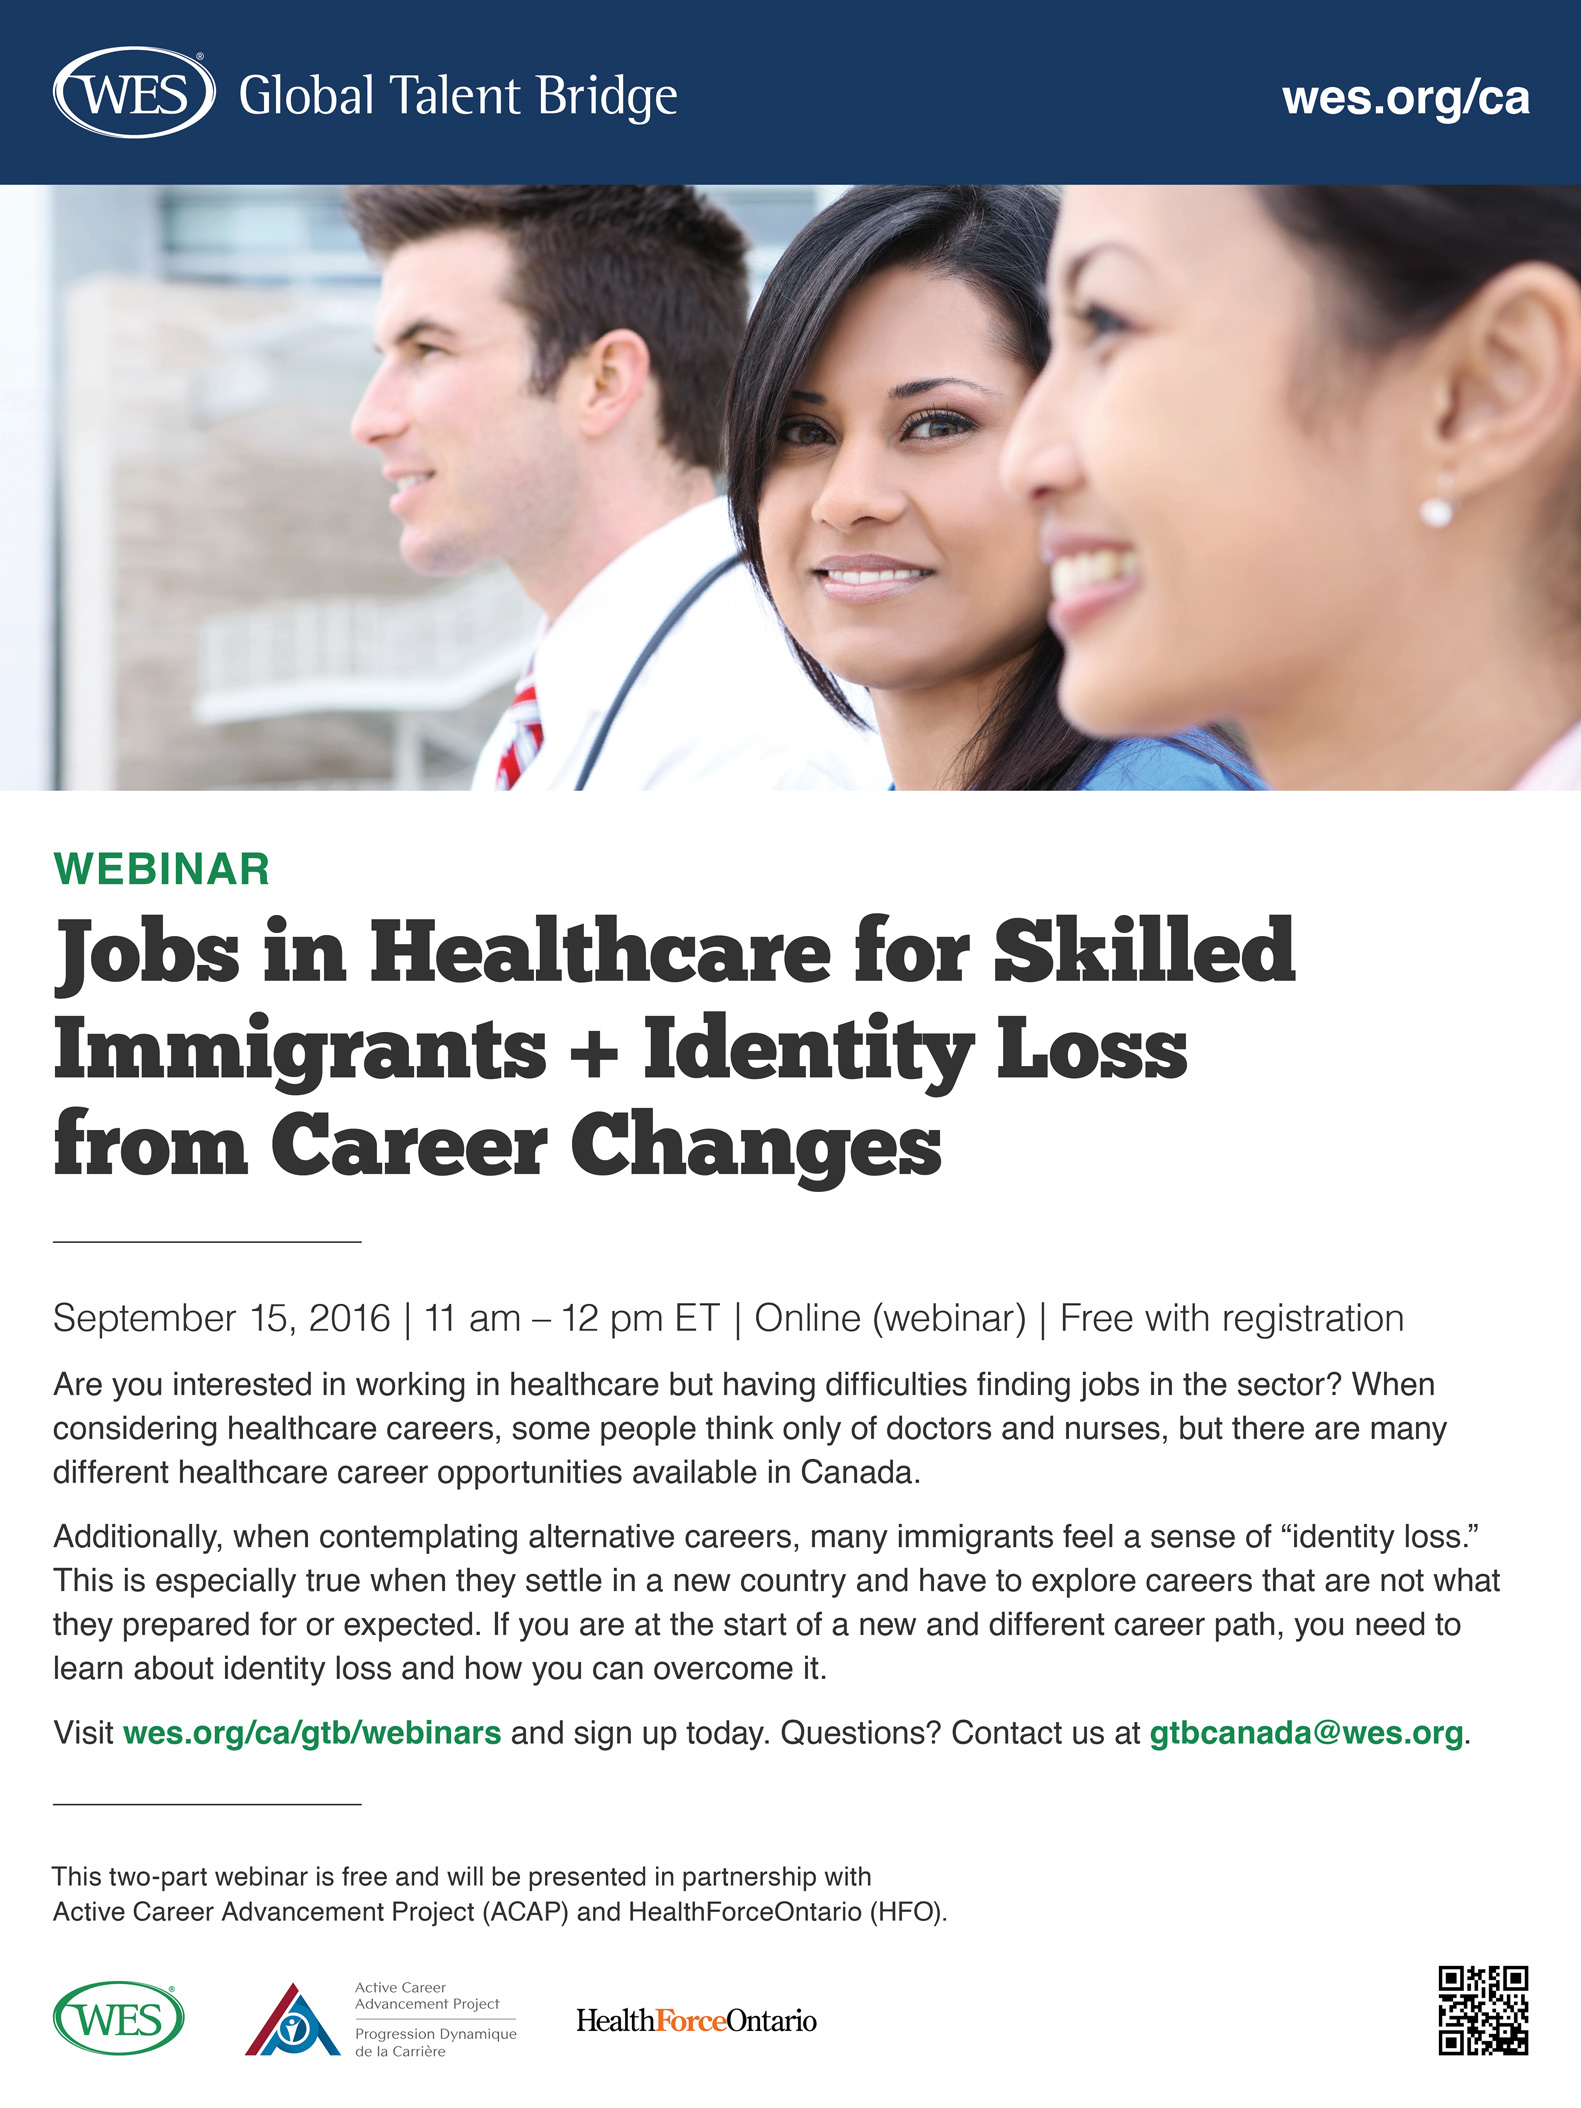 Flyer promoting a webinar on the topics of jobs in healthcare and identity loss from career changes.